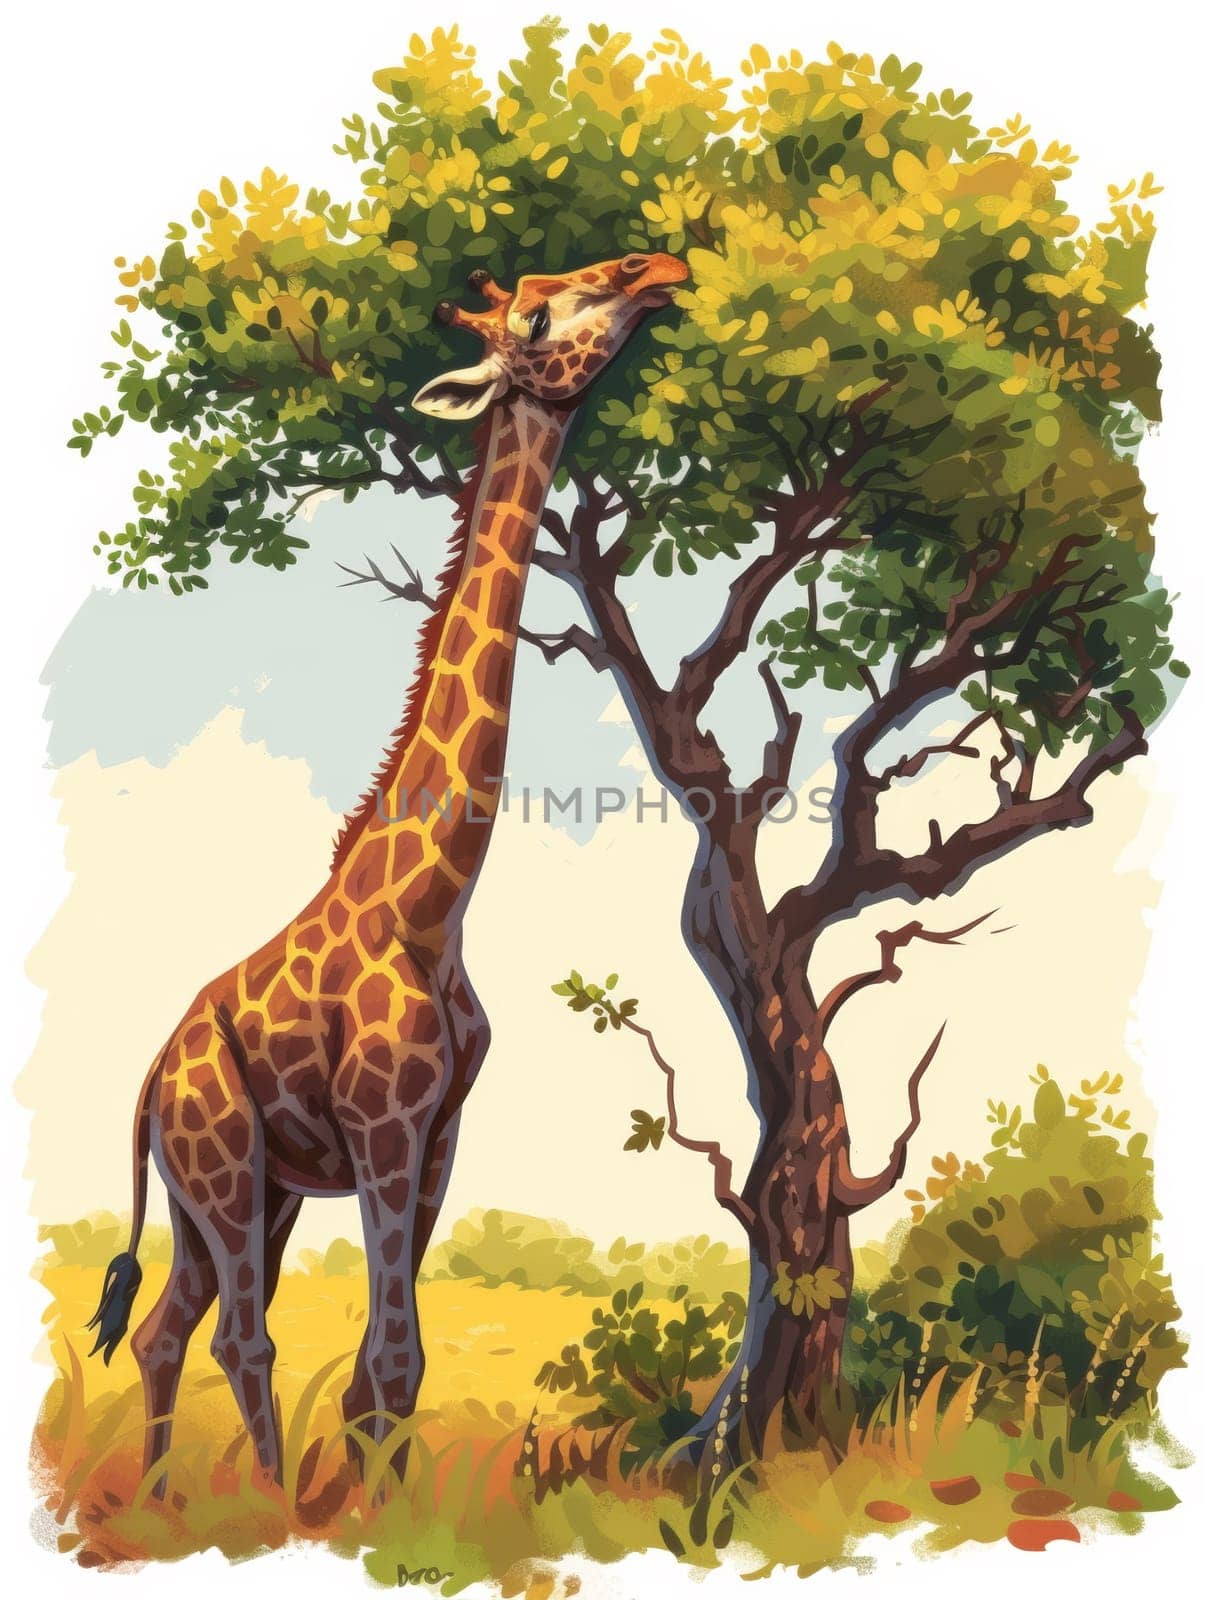 A giraffe reaching up to eat leaves from a tree, AI by starush